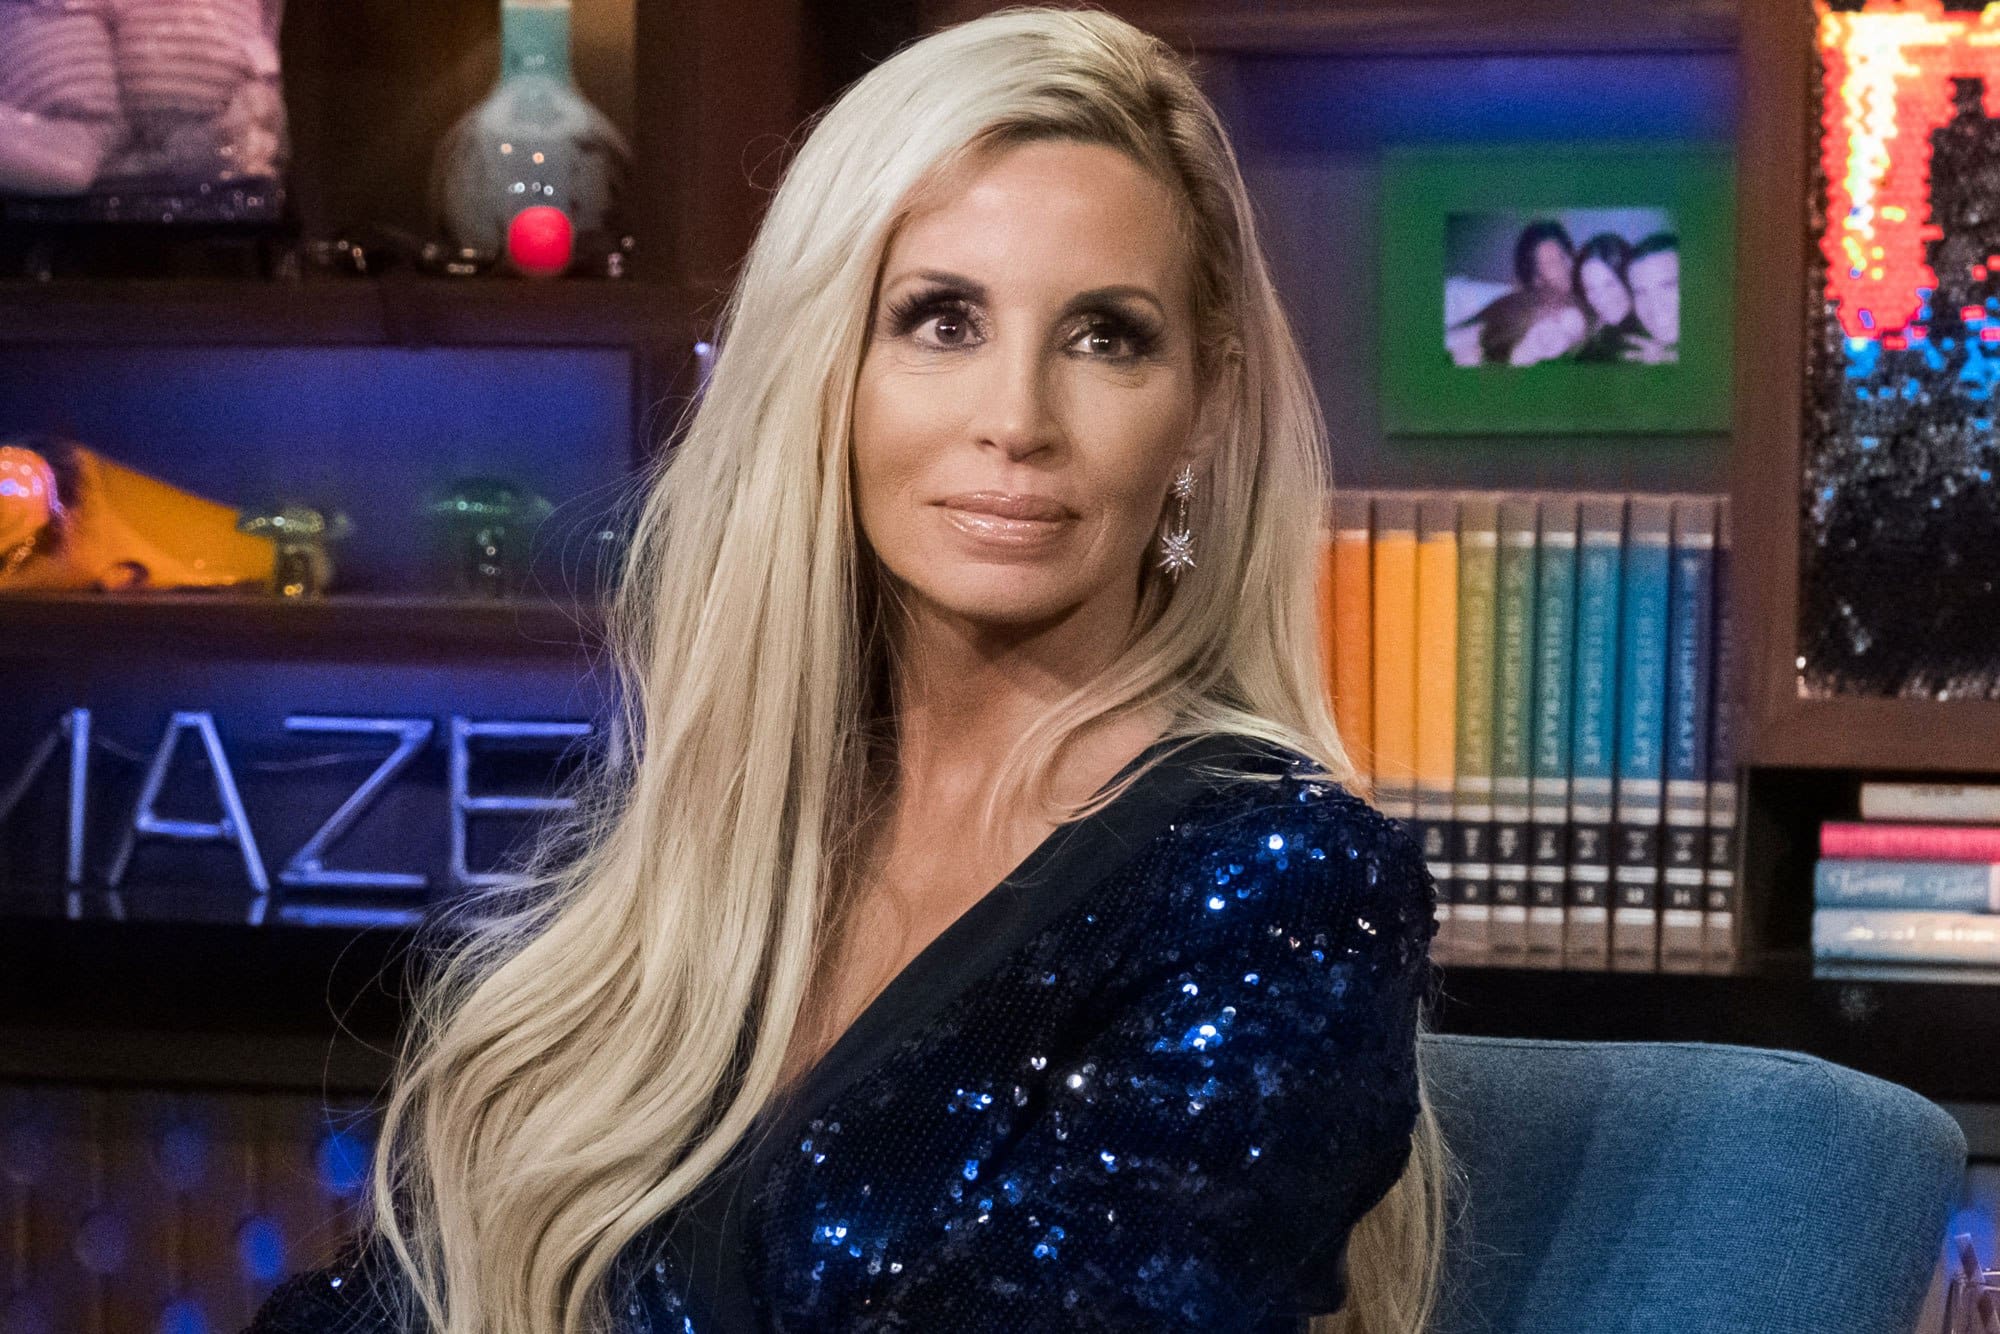 celebrity news, camille grammer, real housewives, rhobh.